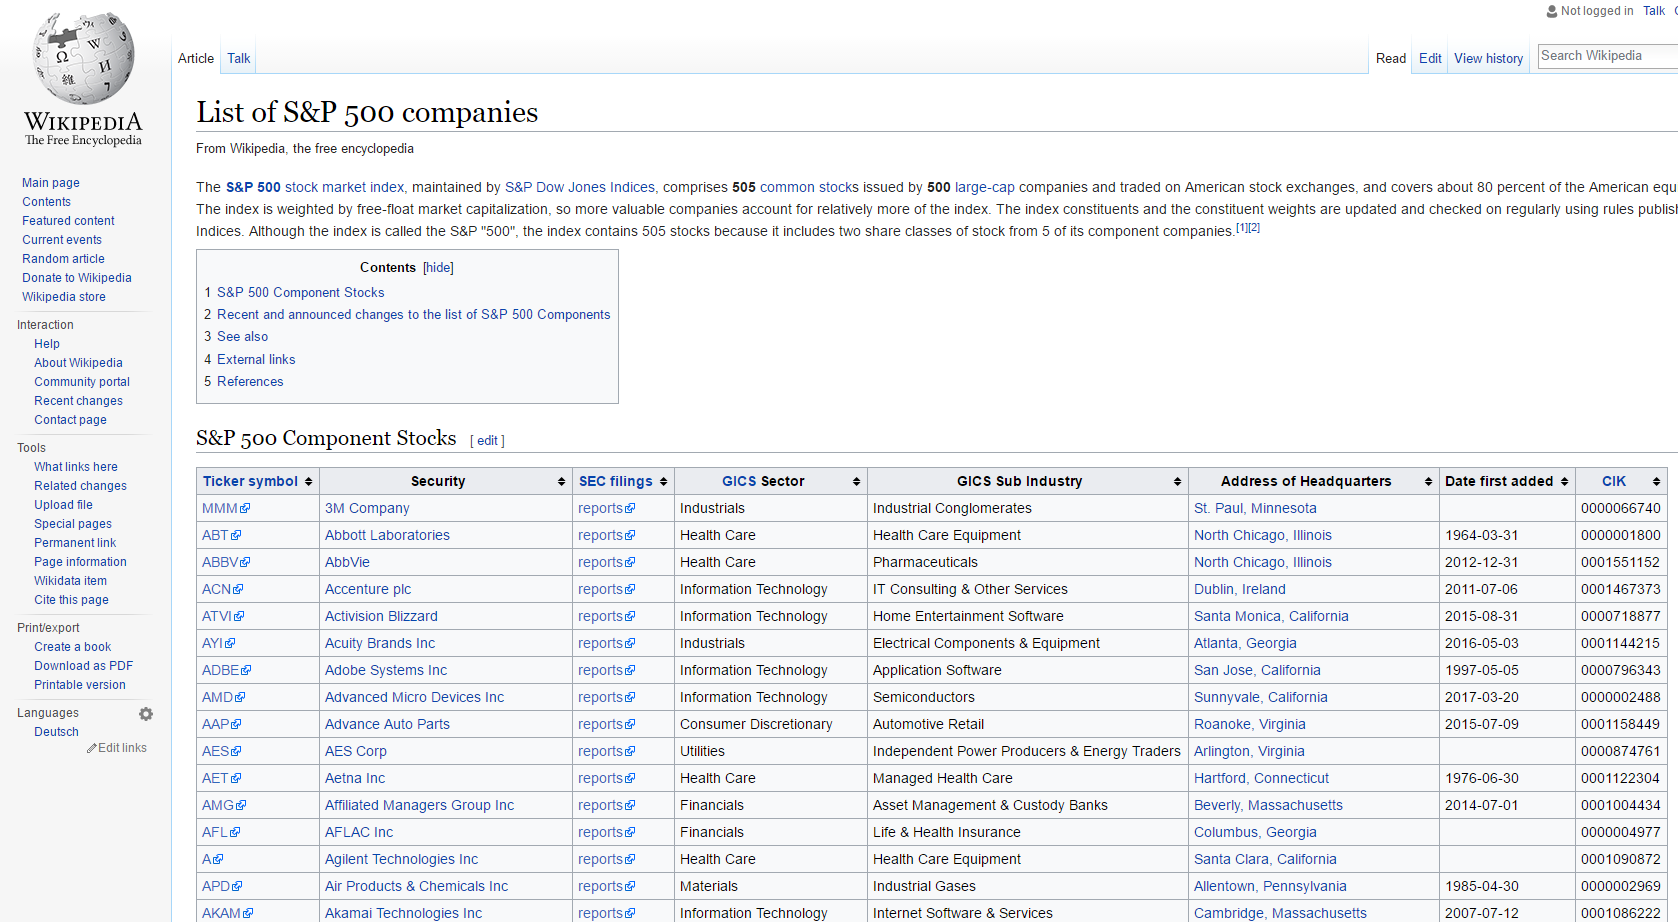 Mirror of Wikipedia page on SP500 components